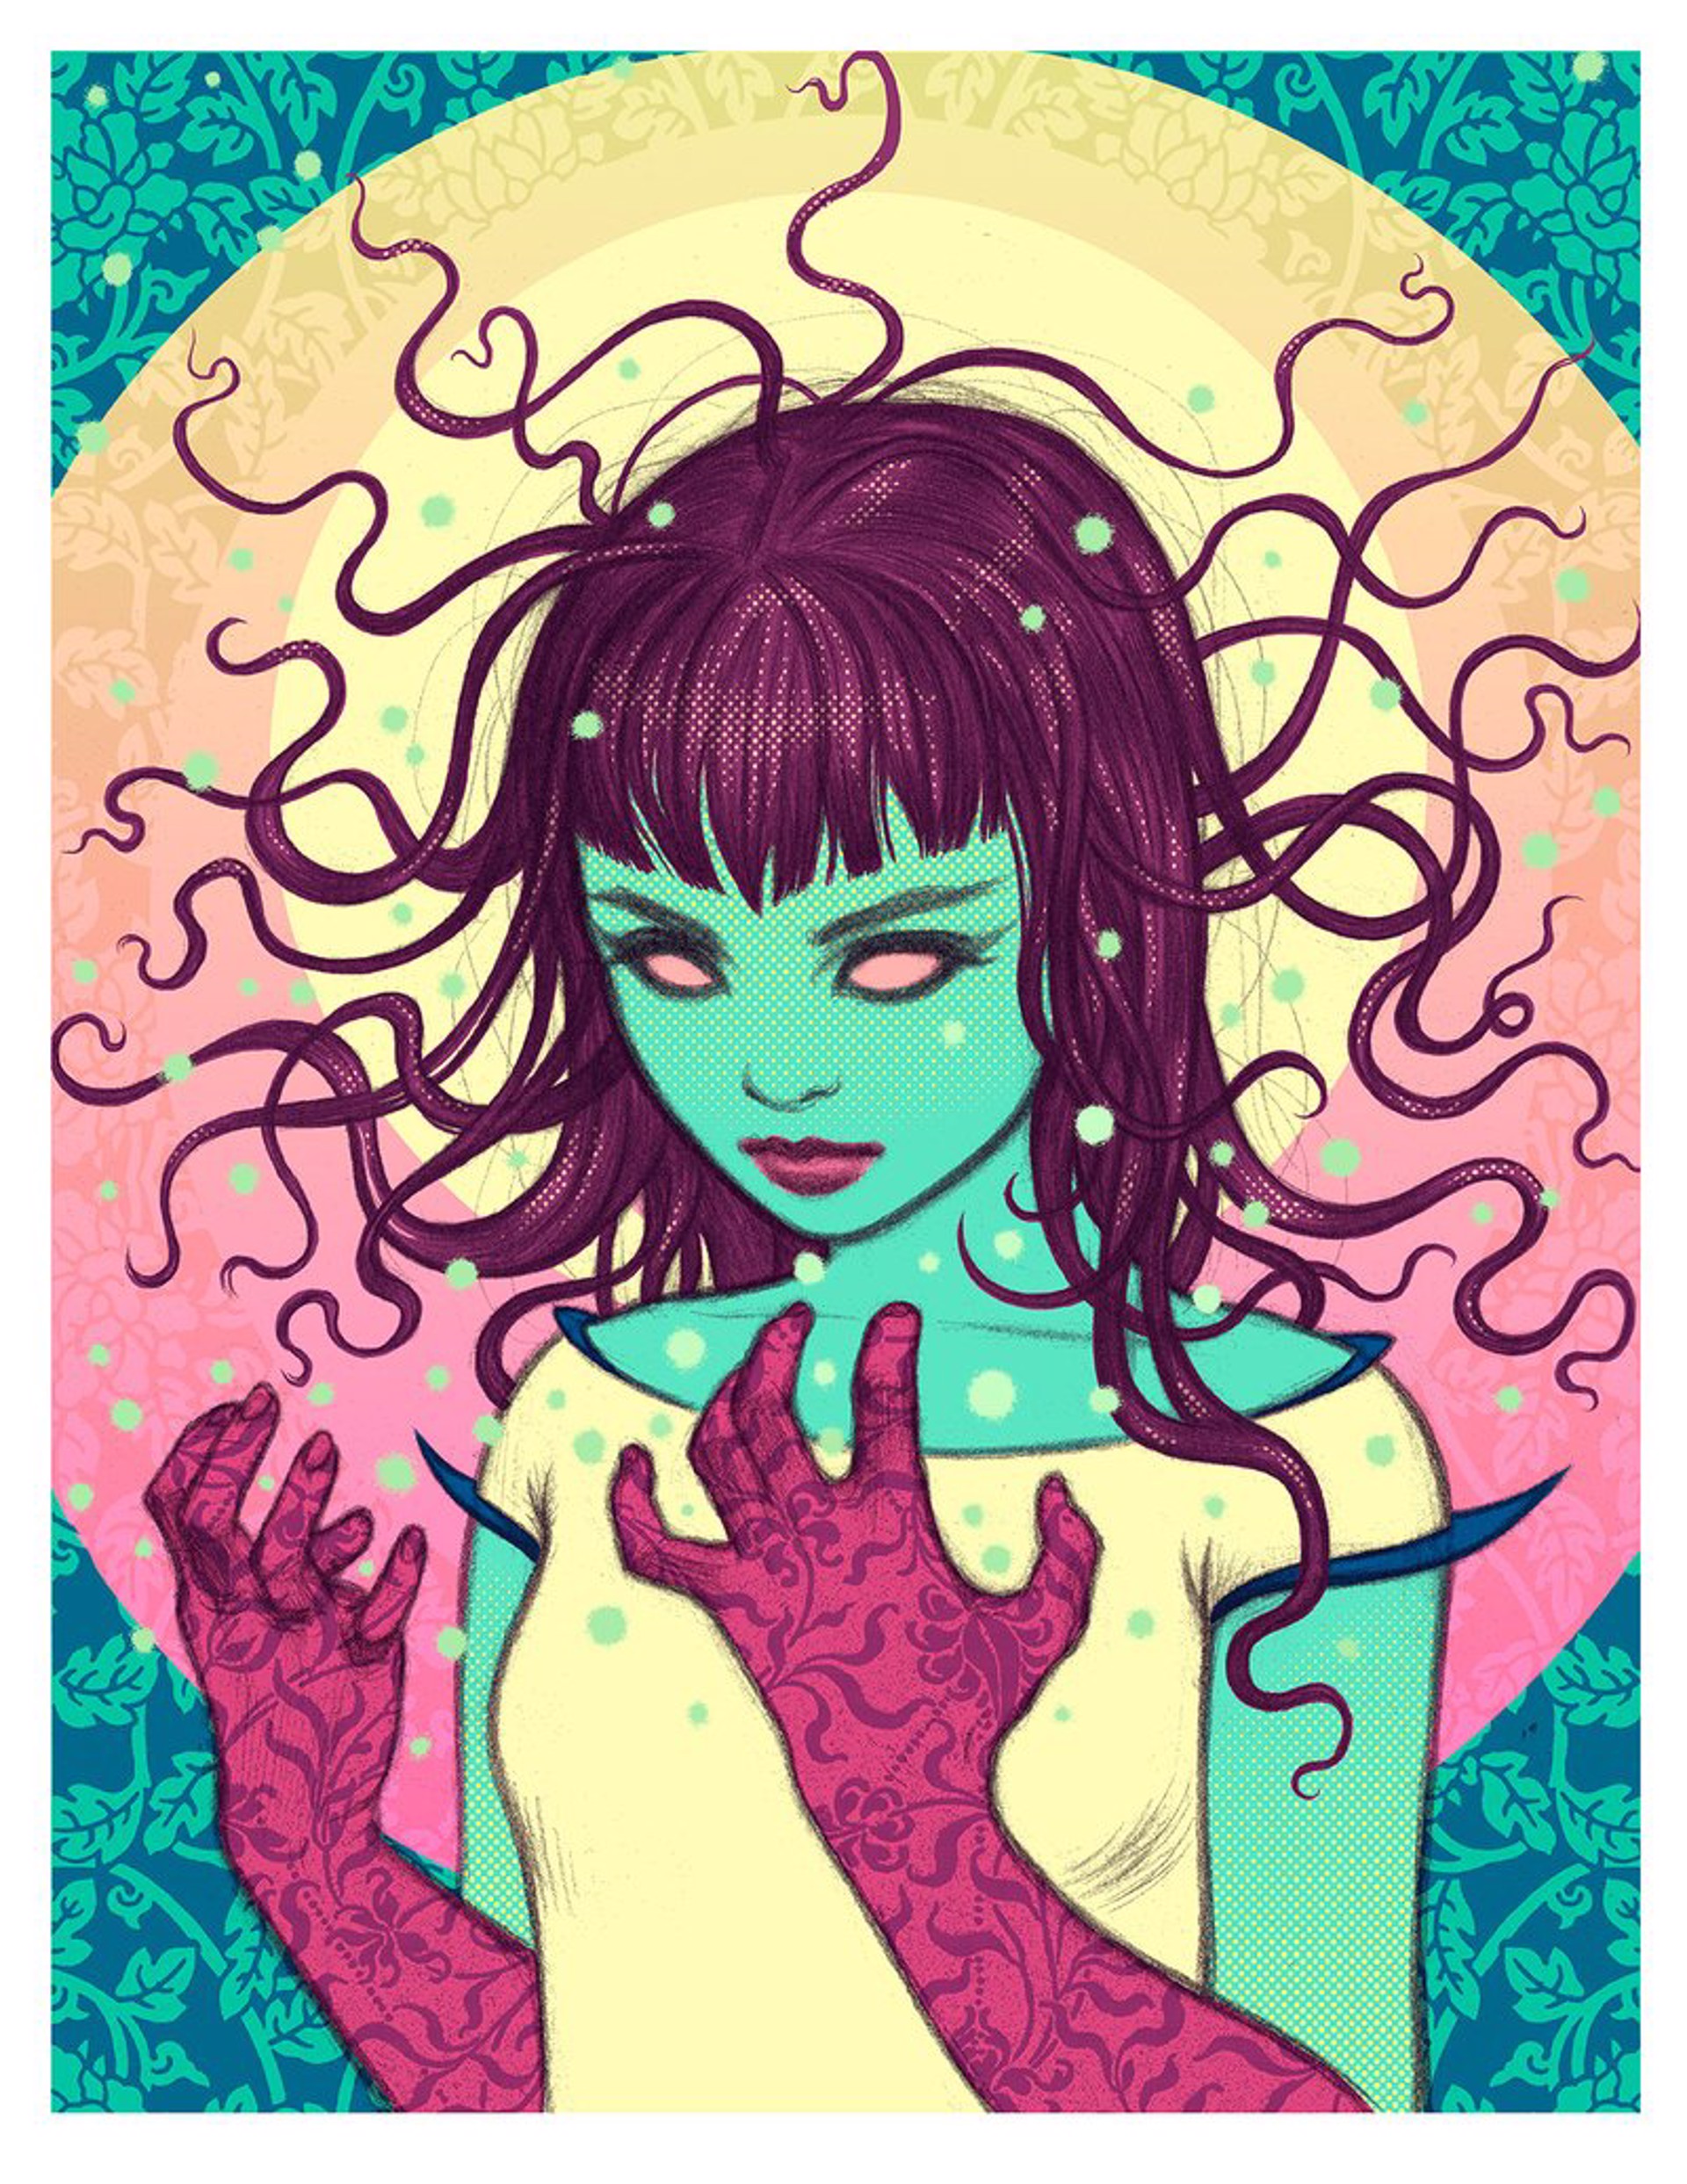 The Absence of Gravity (14/200) by Tara McPherson